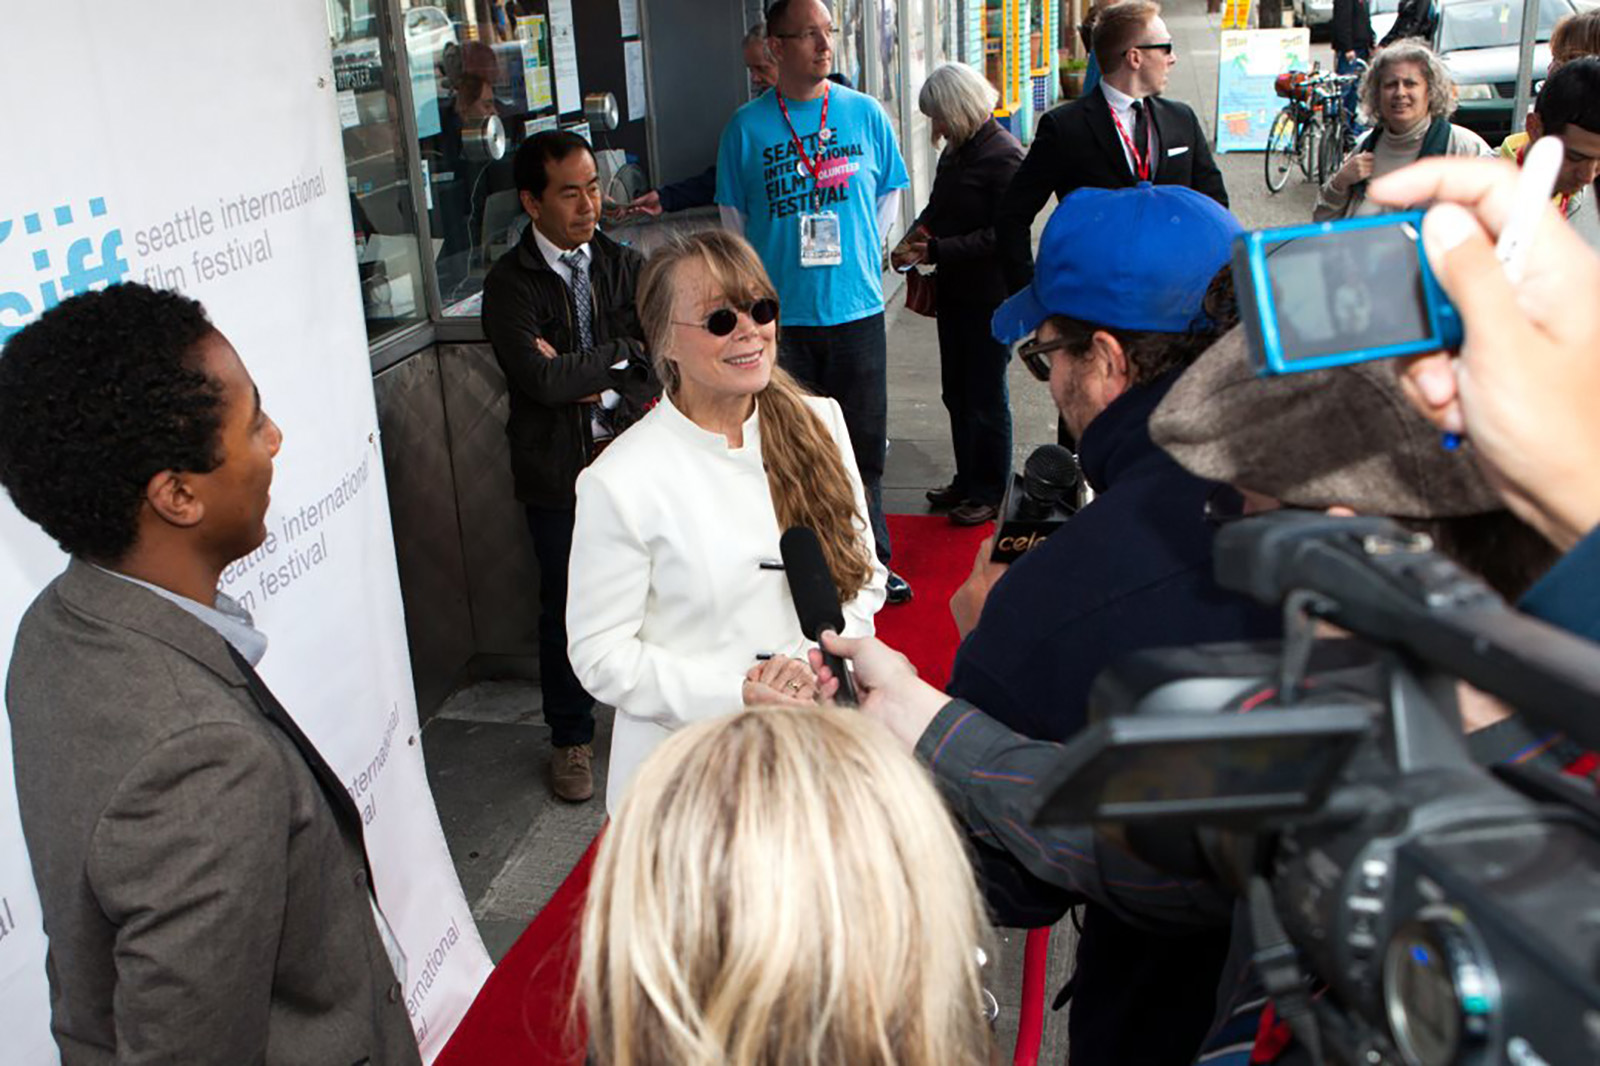 Tribute guest and Actress, Sissy Spacek, walks the red carpet at SIFF Cinema Uptown before the Evening with Sissy Spacek program, which included a screening of her film, Badlands